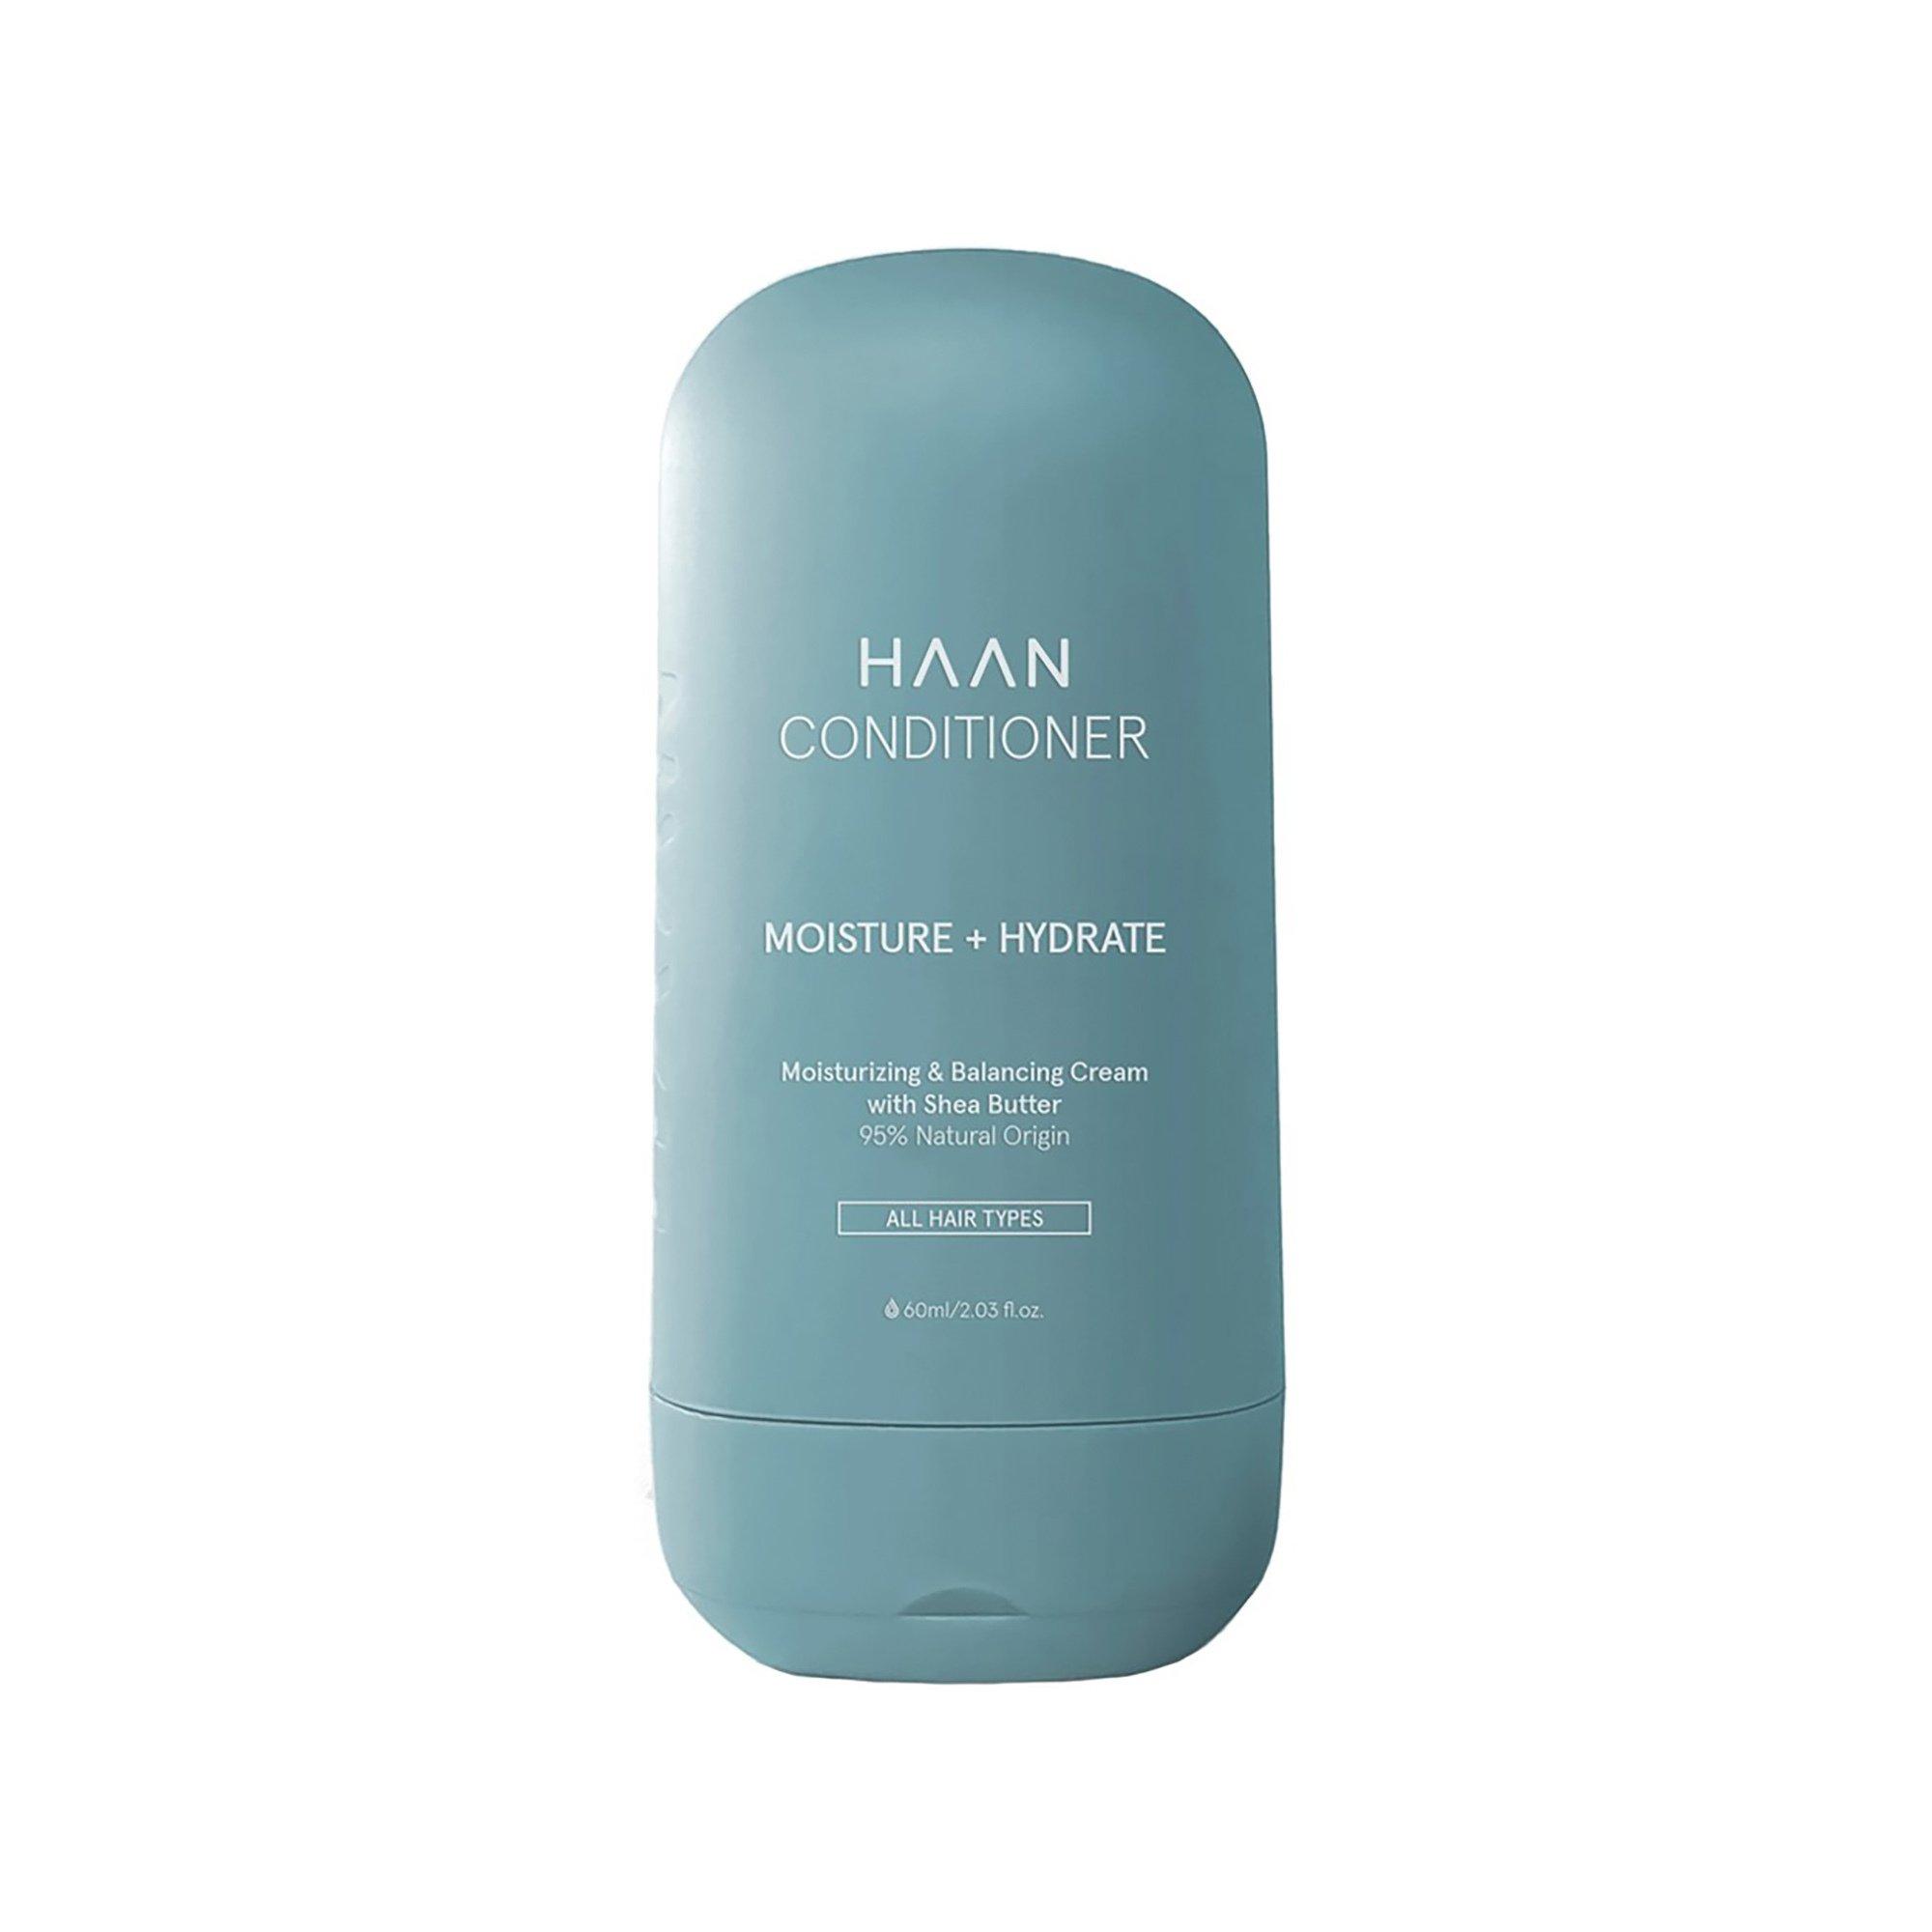 HAAN Hair Conditioner New Morning Glory Mini Hair Conditioner Mini 